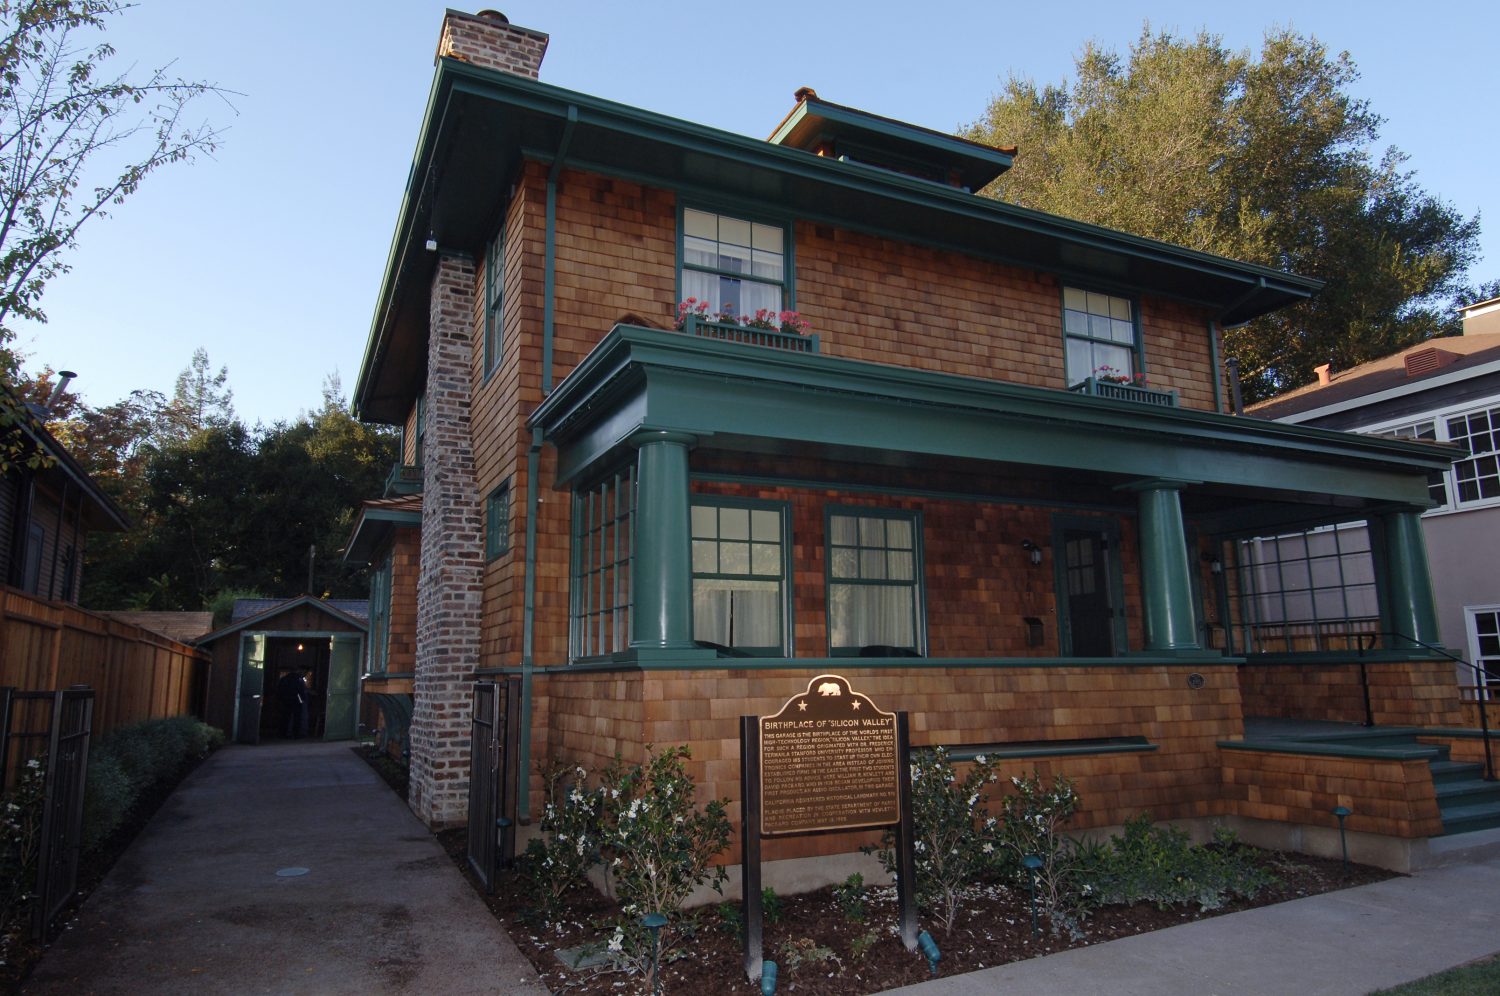 Photo of the restored Hewlett-Packard house with a plaque indicating its listing in the National Historic Register.